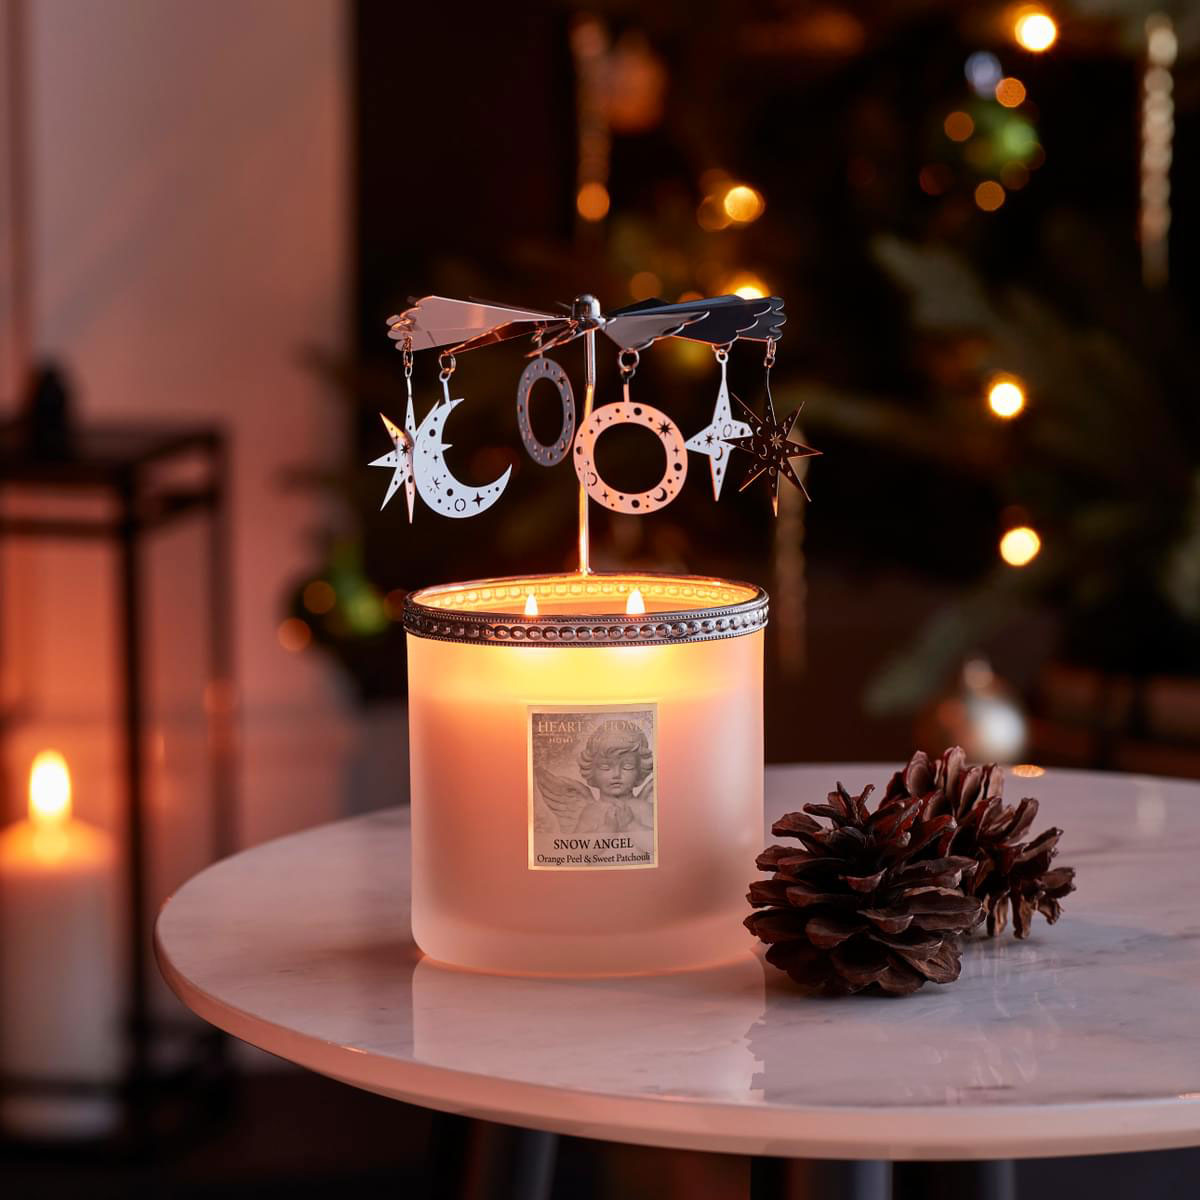 Heart and Home Ellipse Candle Carousel